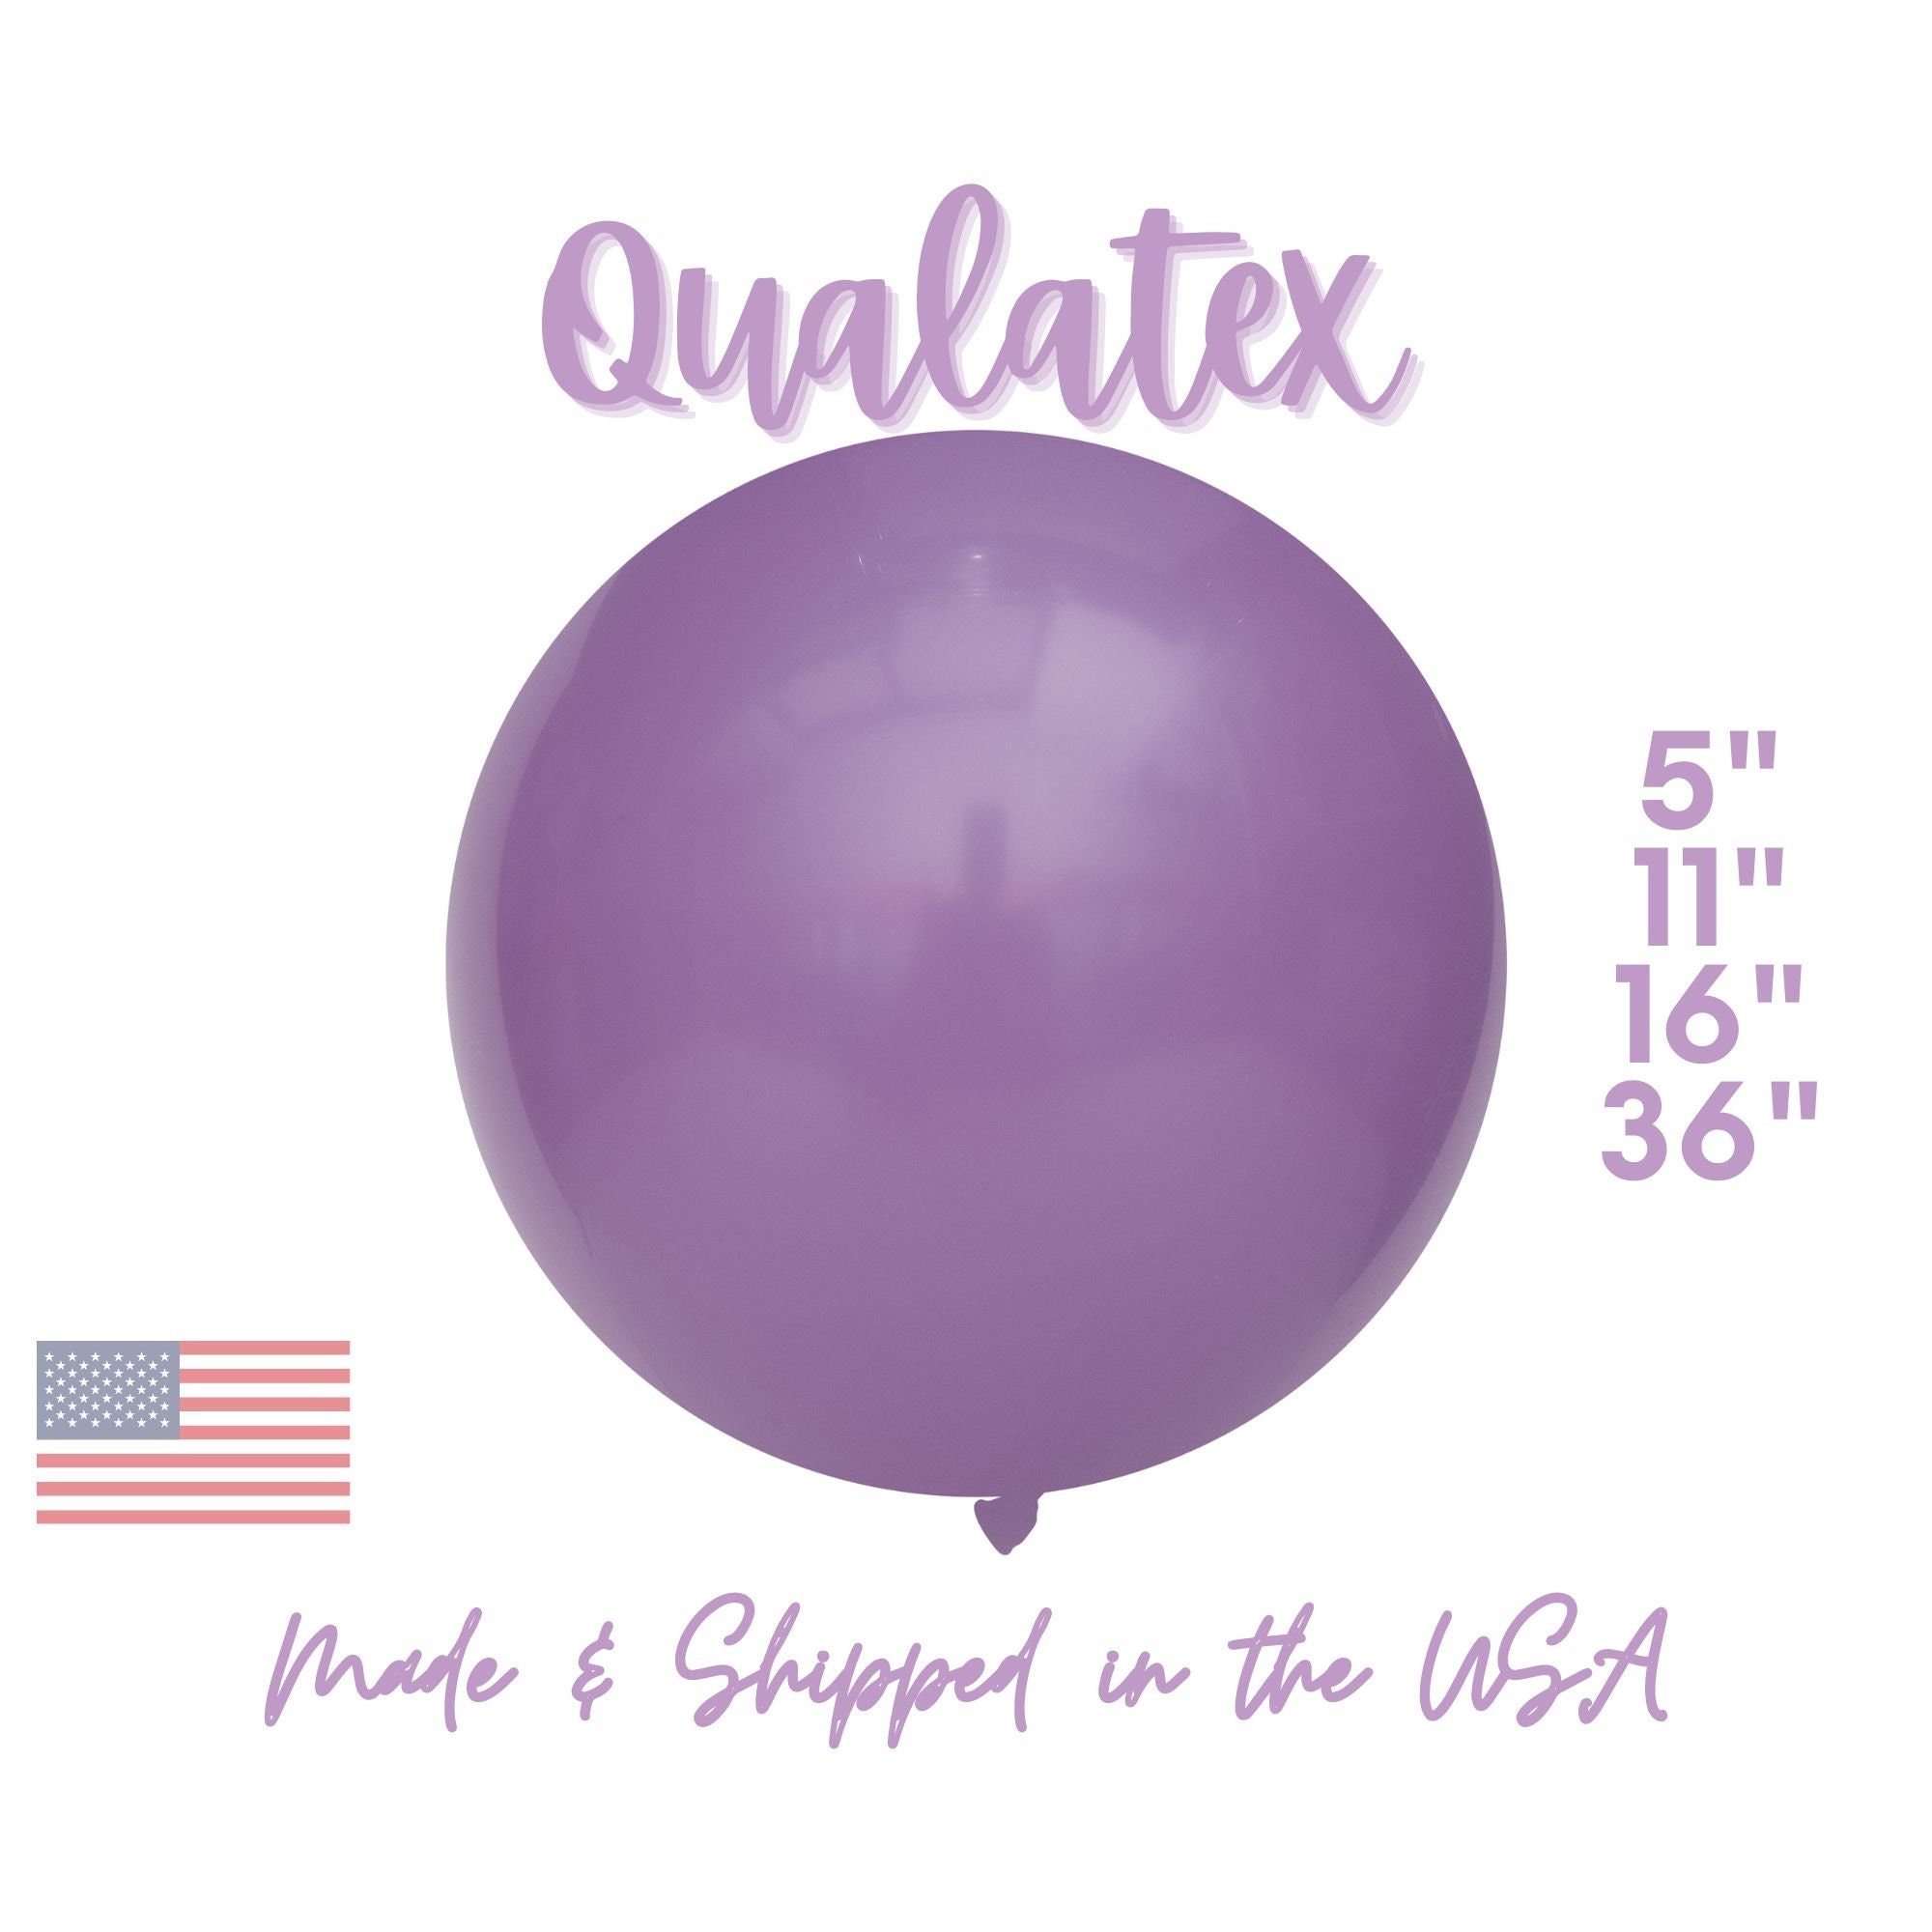 Qualatex Babys Nursery 18 Clear Balloons x 25 - Stuffing or Air Fill